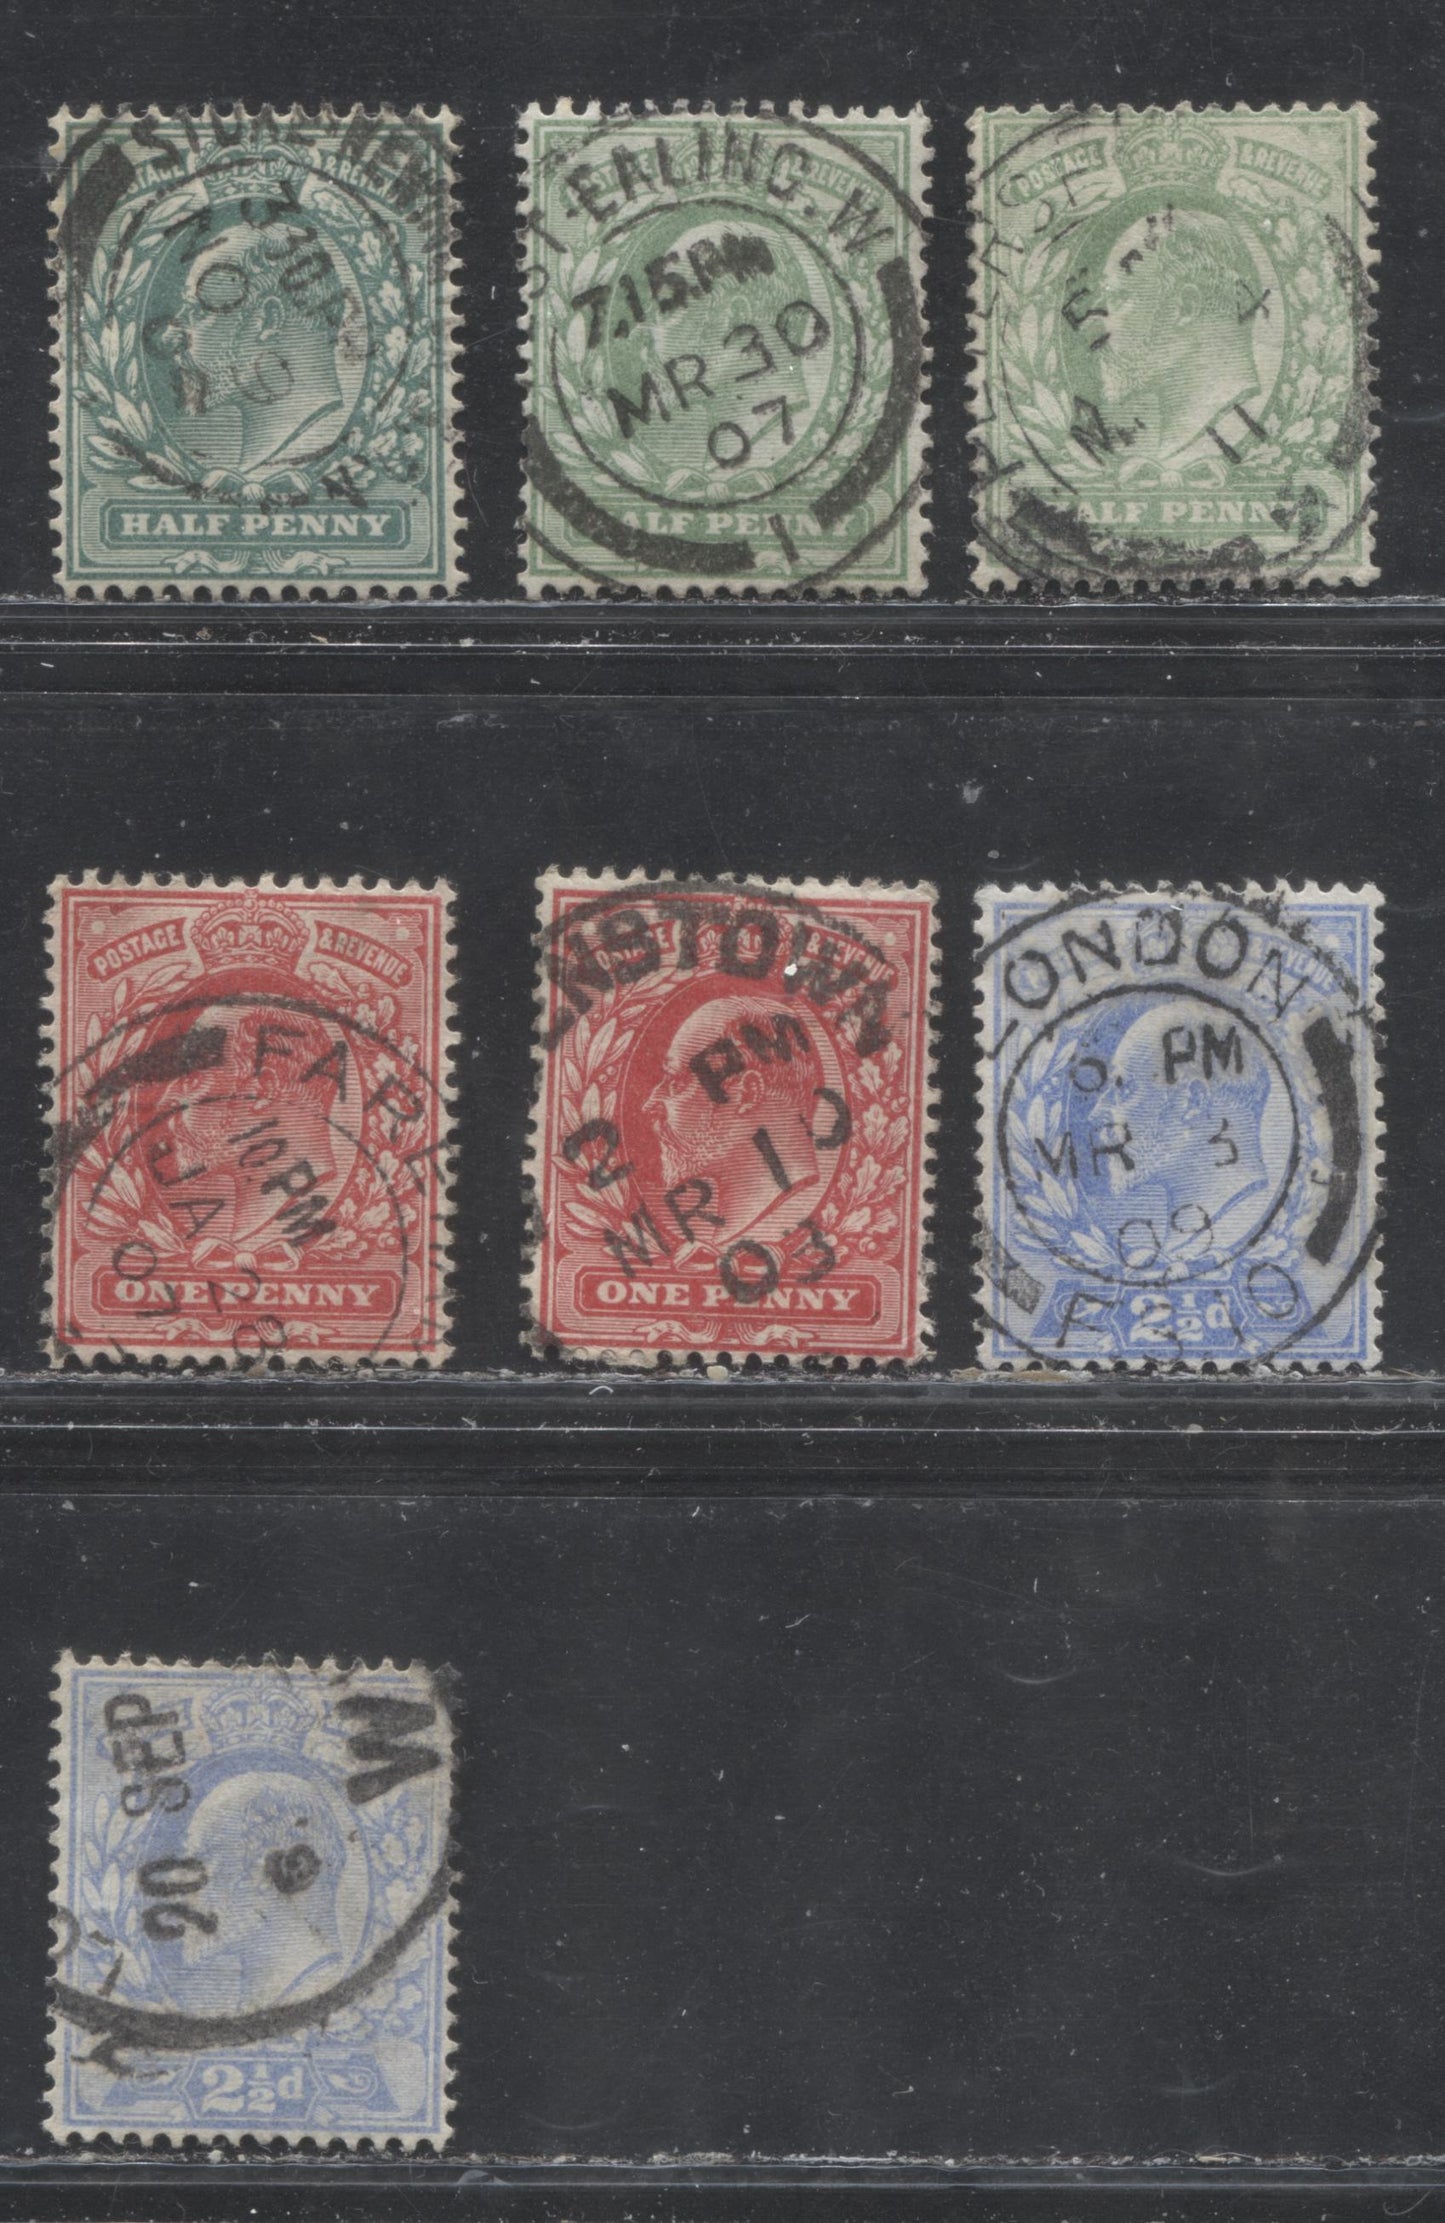 Lot 222 Great Brittain SG#216/231 1/2d - 2.5d Blue Green - Ultramarine King Edward VII, 1902-1910 De La Rue Keyplate Issue, 7 Fine Used Singles, Imperial Crown Watermark, Perf. 14, Including Most Gibbons Listed Shades